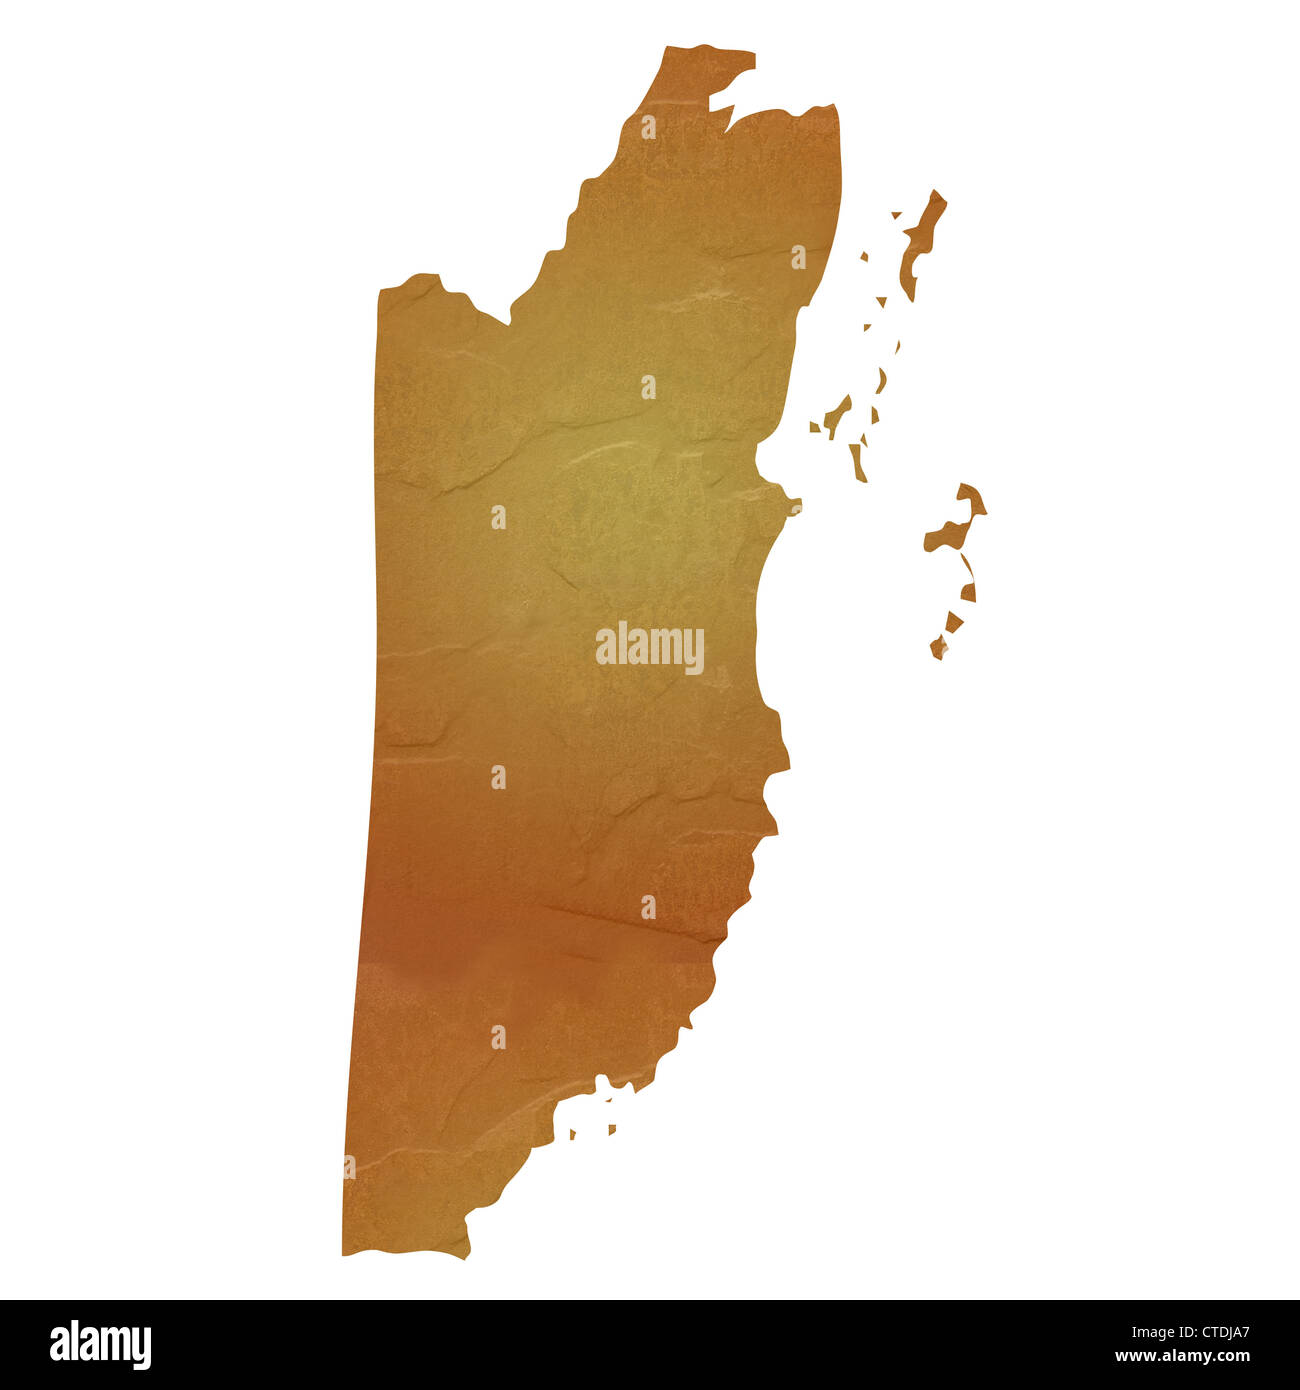 Textured map of Belize map with brown rock or stone texture, isolated on white background with clipping path. Stock Photo